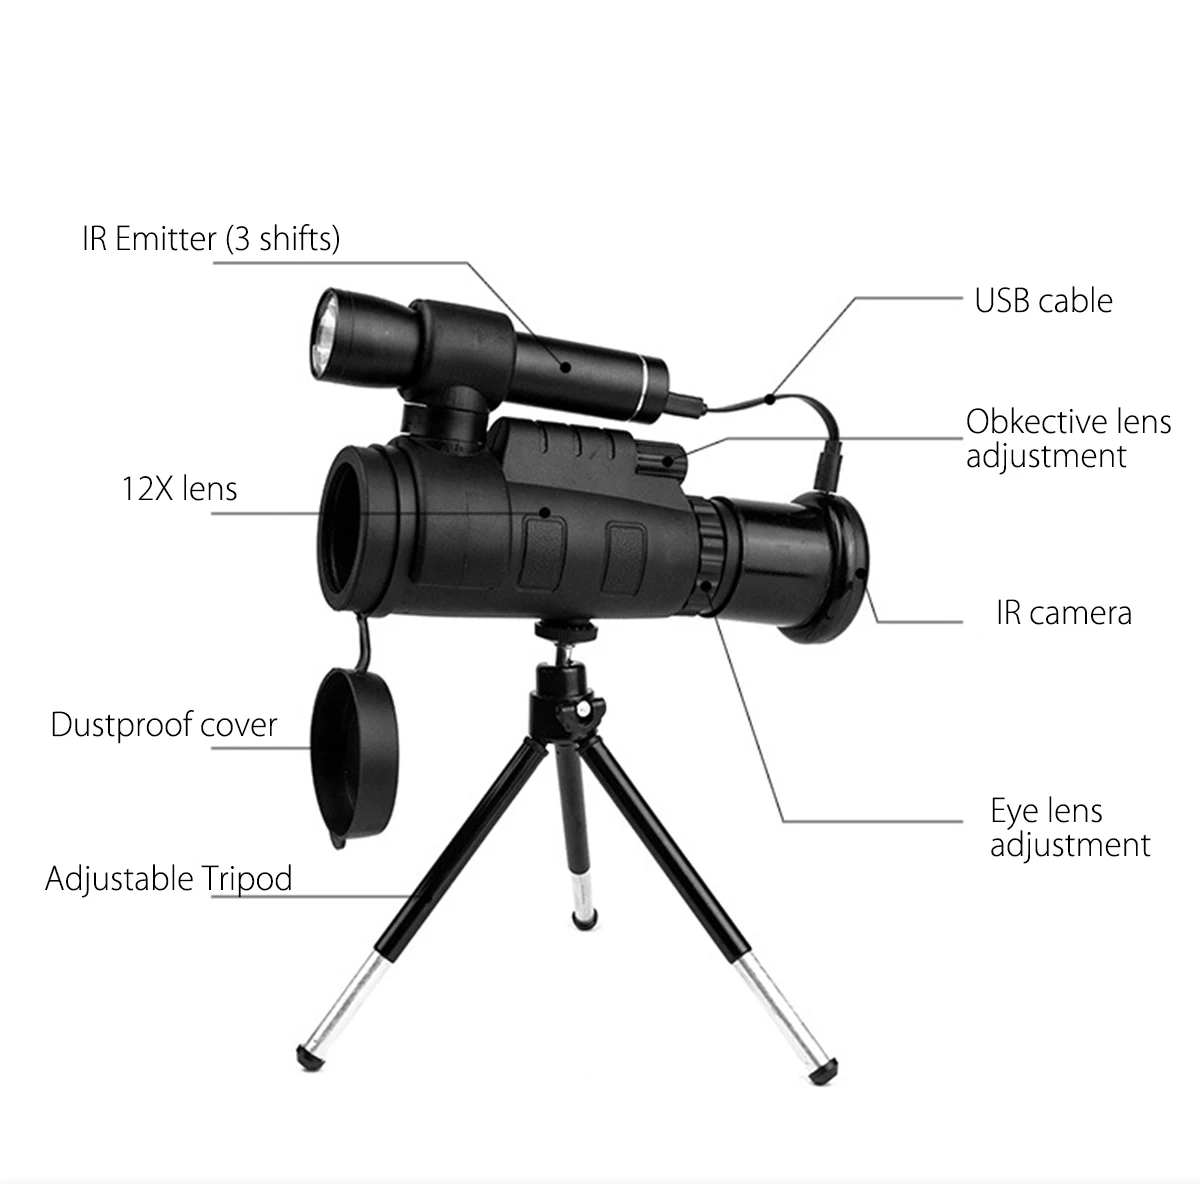 40x60 WIFI IR Infrared Night Vision Monocular Telescope HD Optical Smartphone Lens for Outdoor Hunting+Tripod Phone Holder